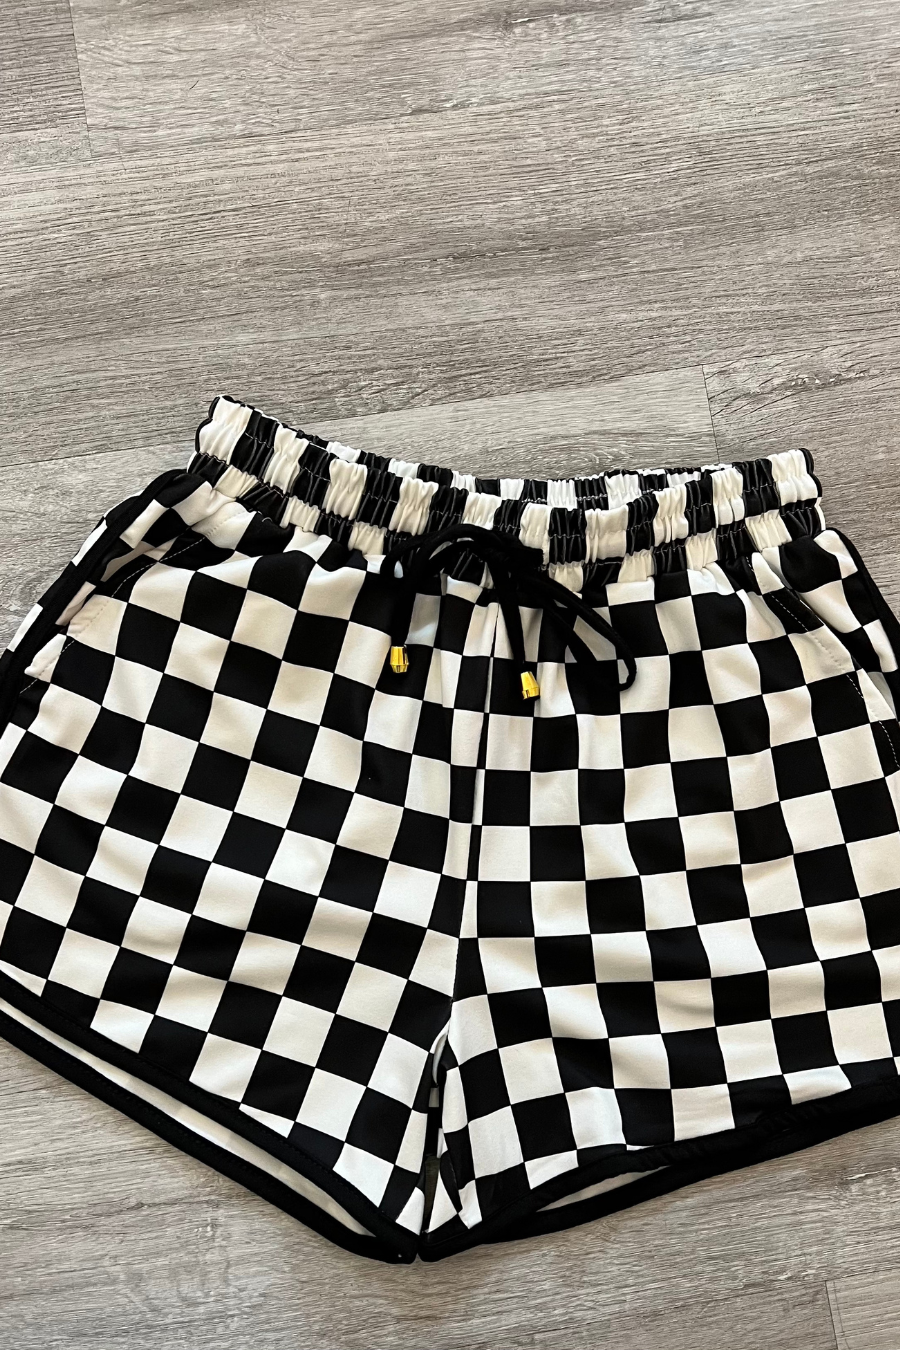 PREORDER: Checkerboard Checkered Everyday Shorts by Jess Lea (Ships in 2-3 Weeks)